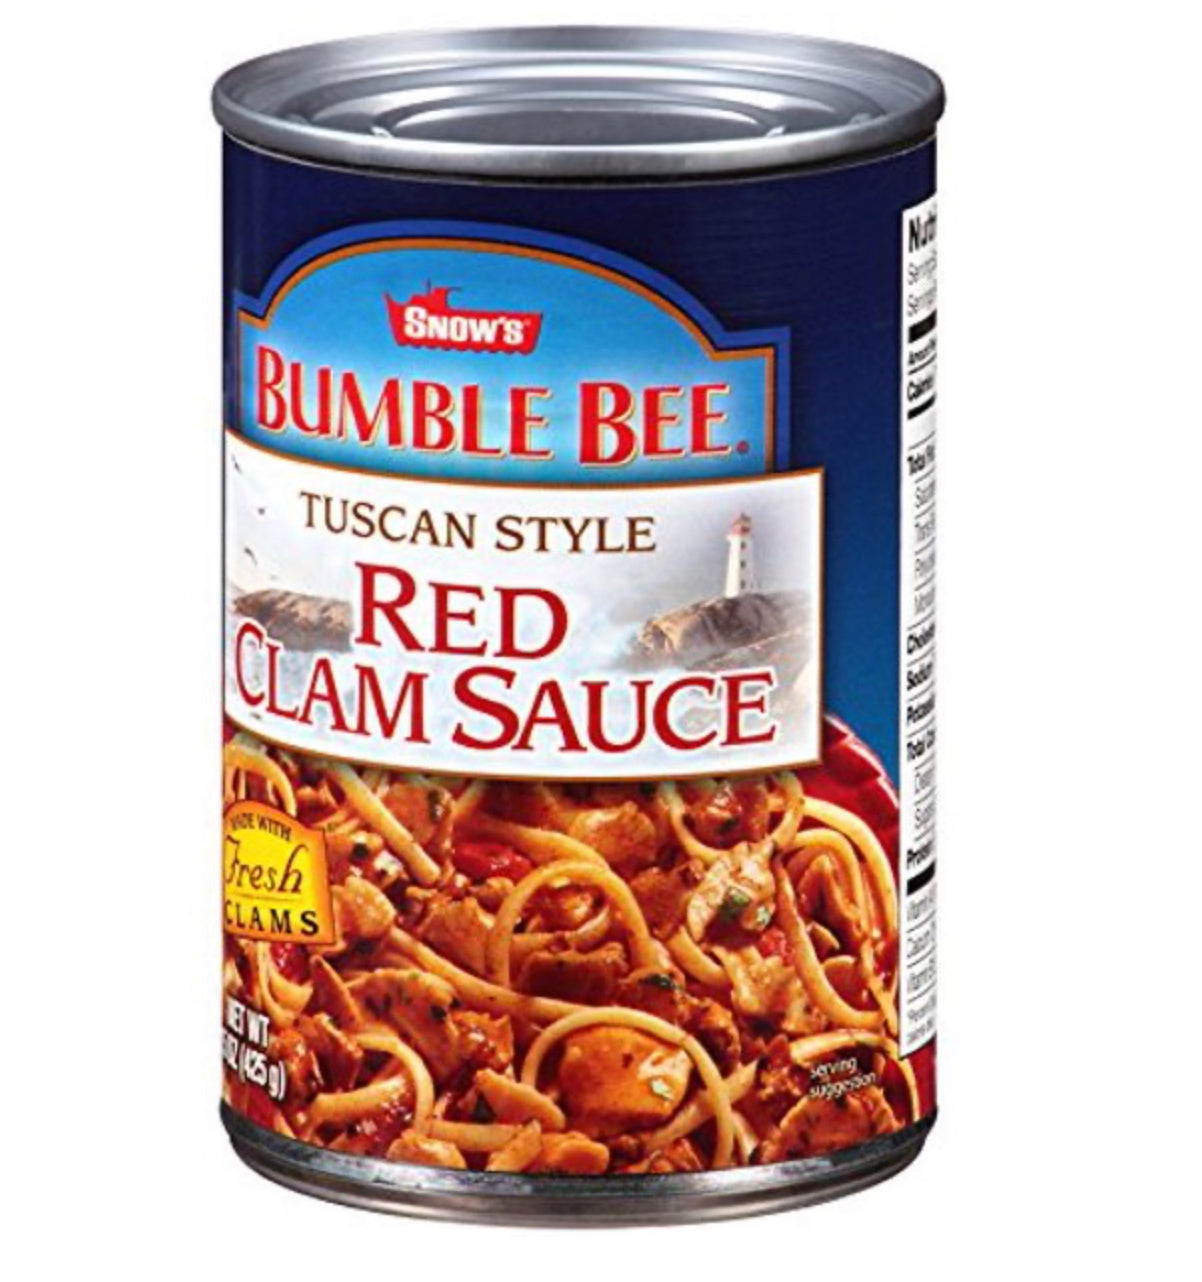 Bumble Bee Tuscan Style Red Clam Sauce 15oz